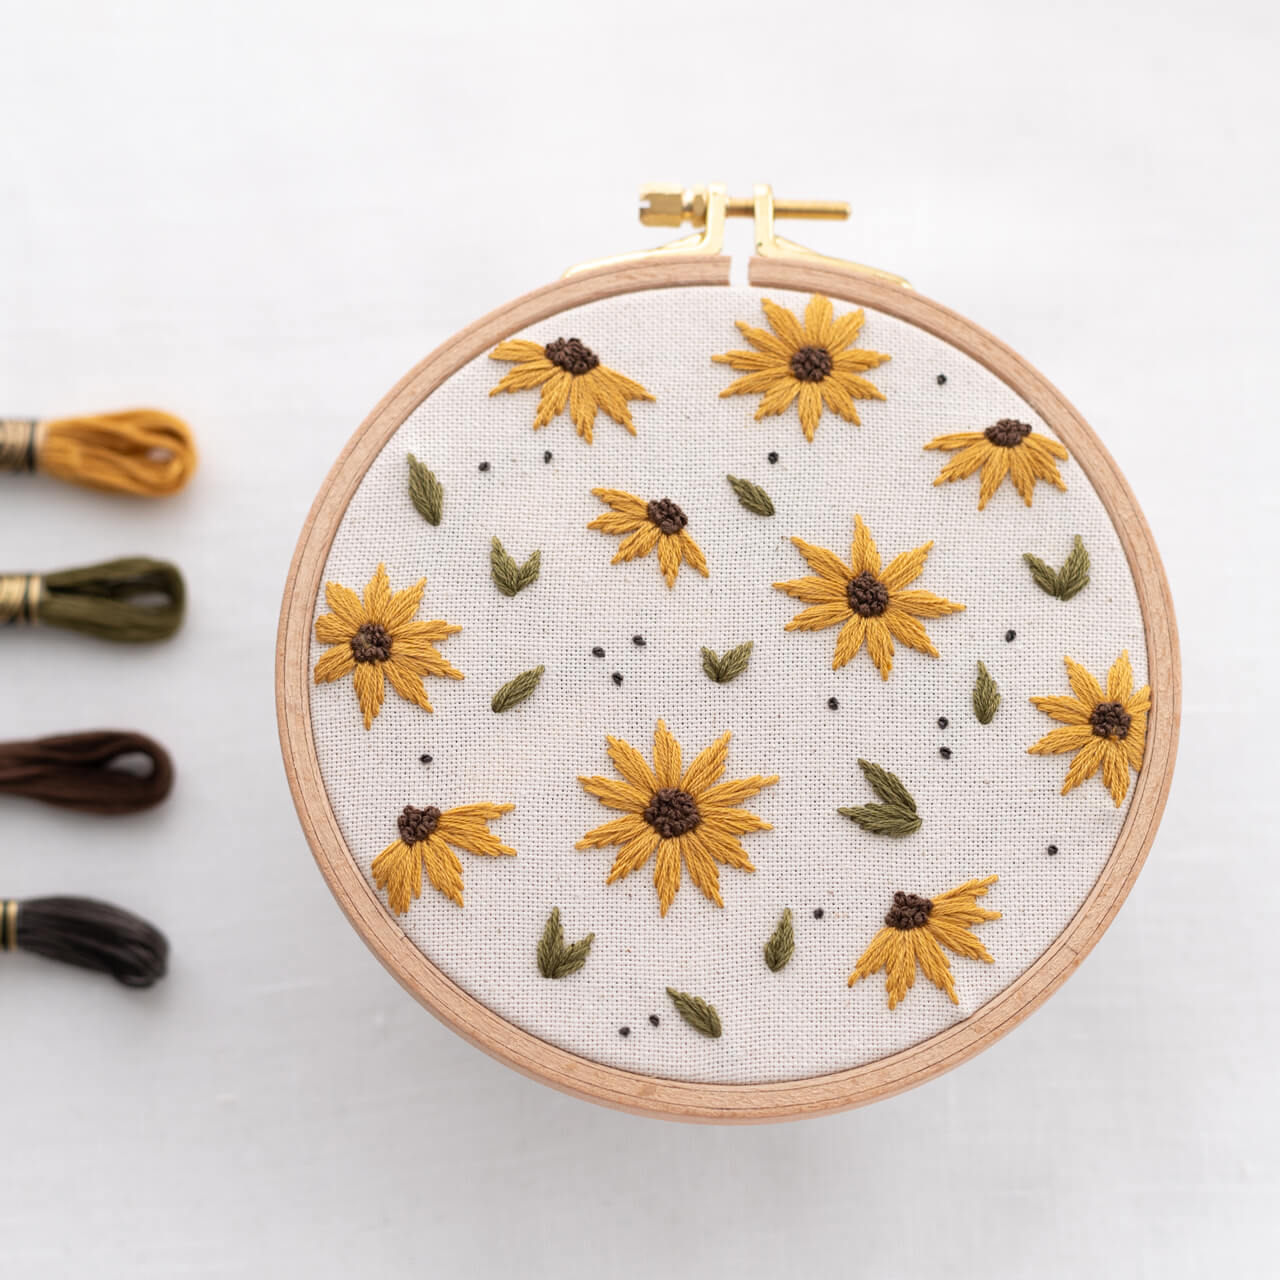 Sunflowers • Embroidery Pattern